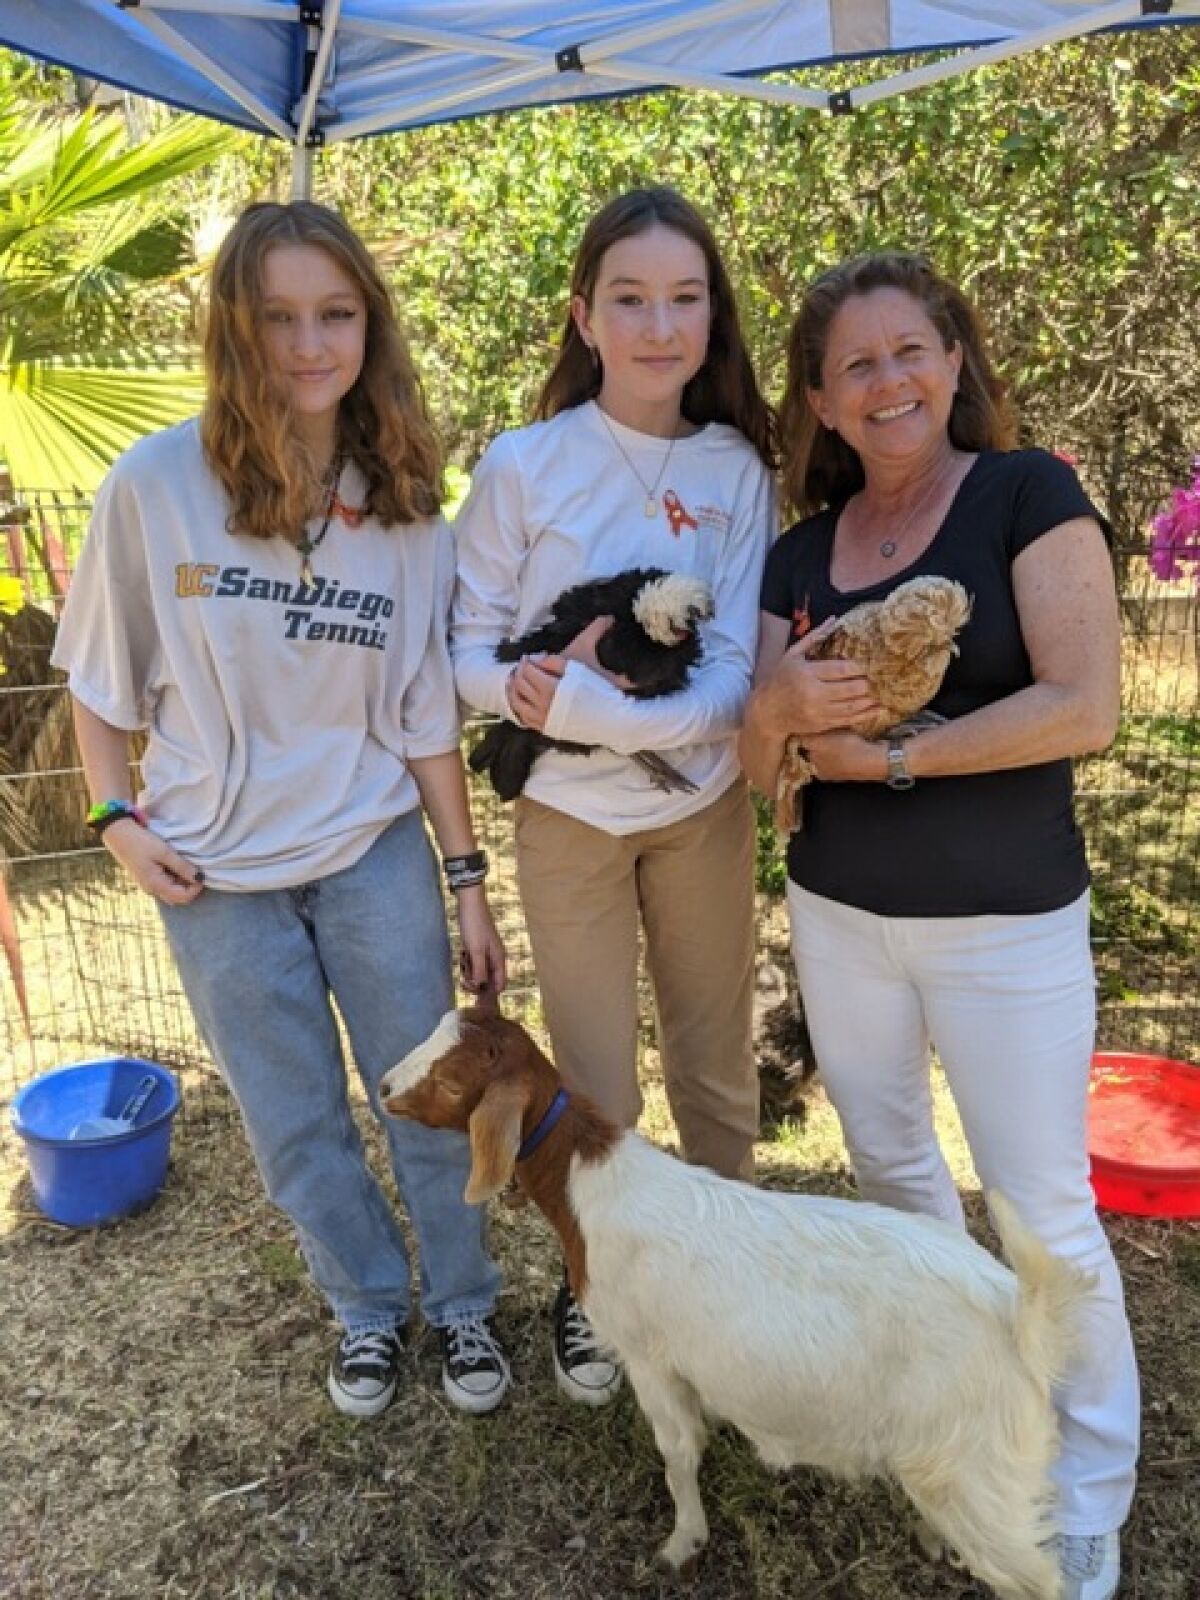 Adopt a Family co-founder and CEO Carine Chitayat with two young guests enjoying Pam’s Petting Zoo.